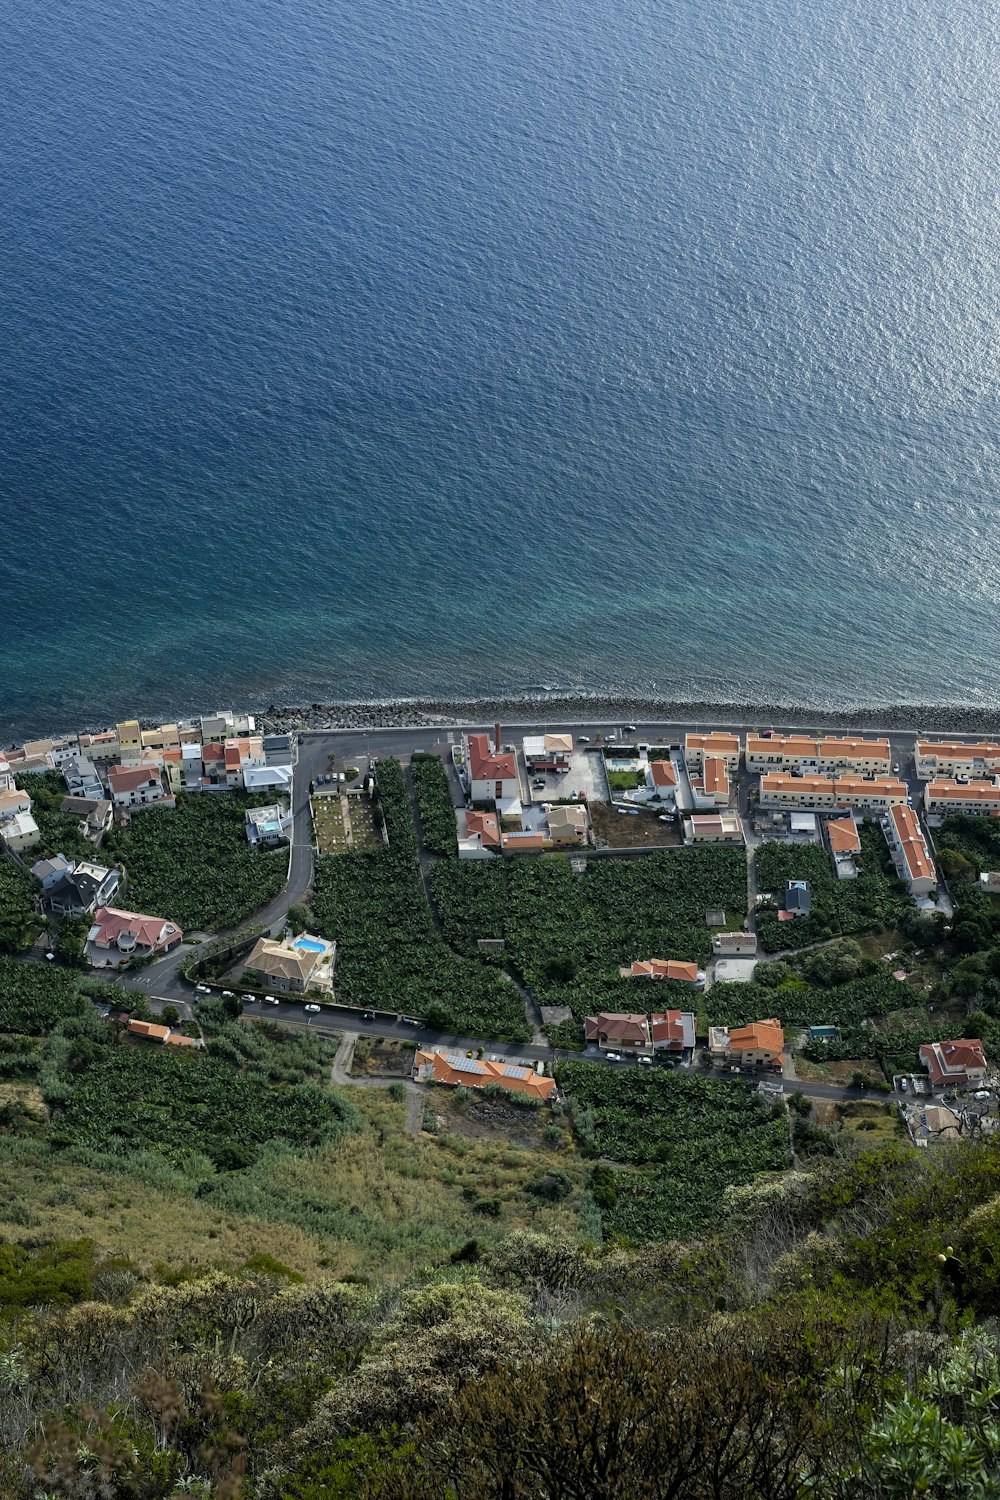 an aerial view of a small town by the ocean